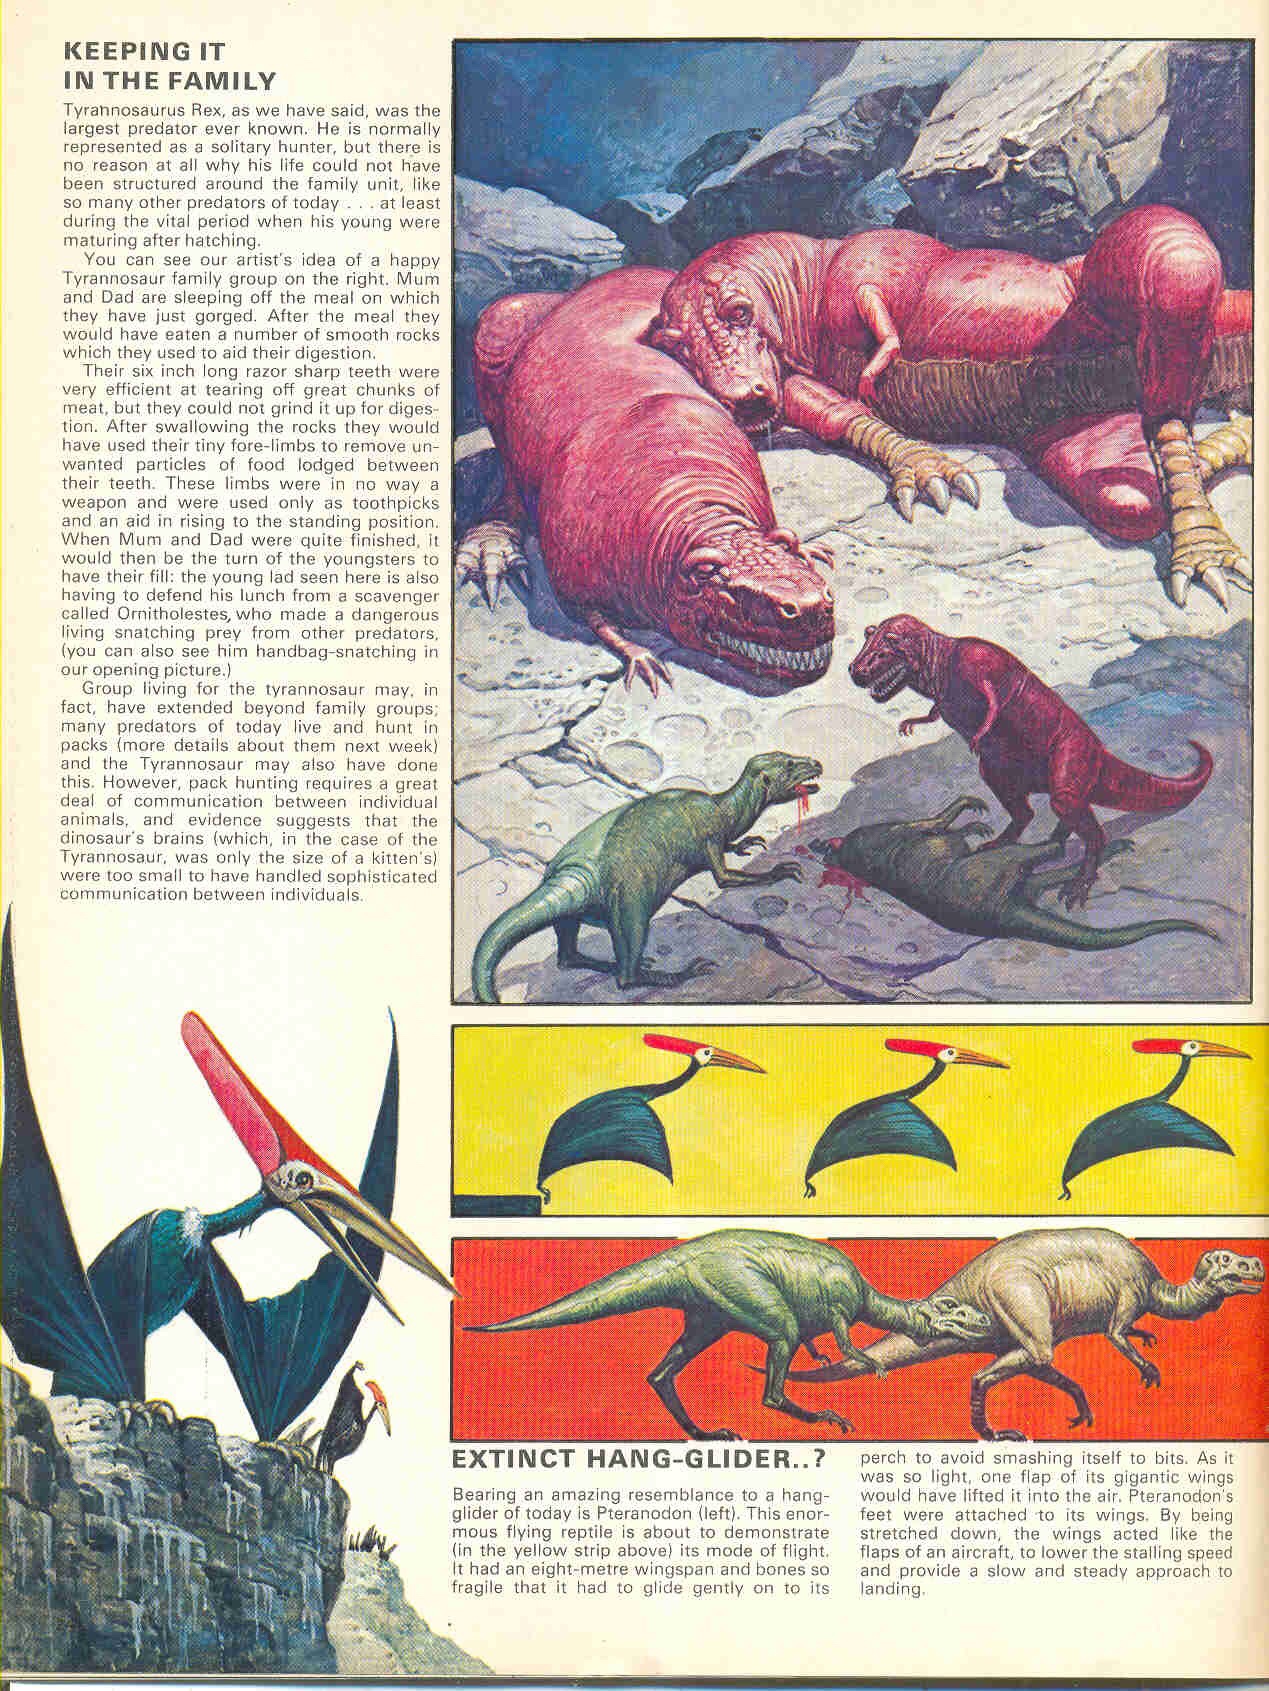 Look Alive Issue One - I, Dinosaur by Don Lawrence and Gillian Wrobel